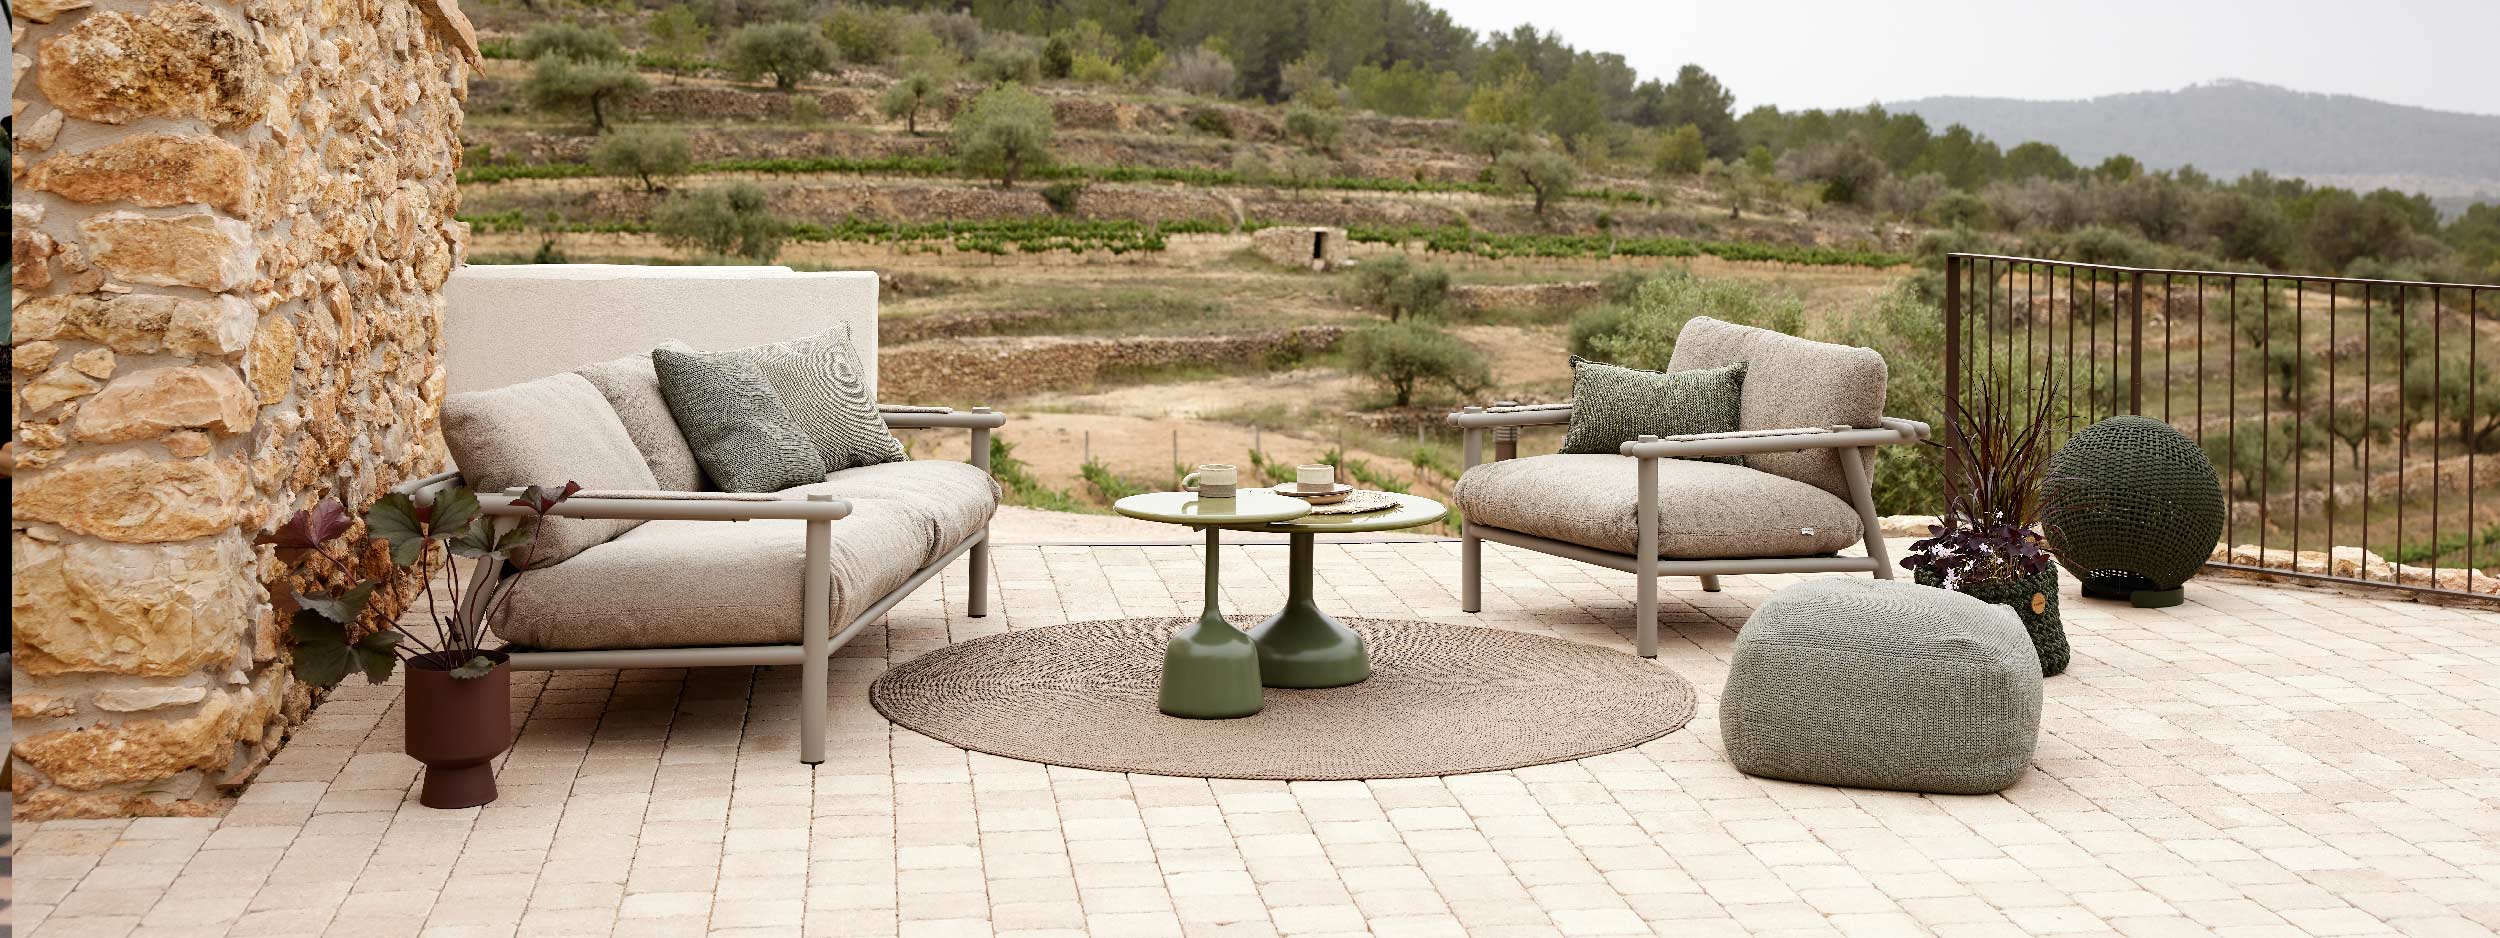 Image of Cane-line Sticks taupe coloured aluminium garden sofa and lounge chair on decking with arid terraced hillside in the background